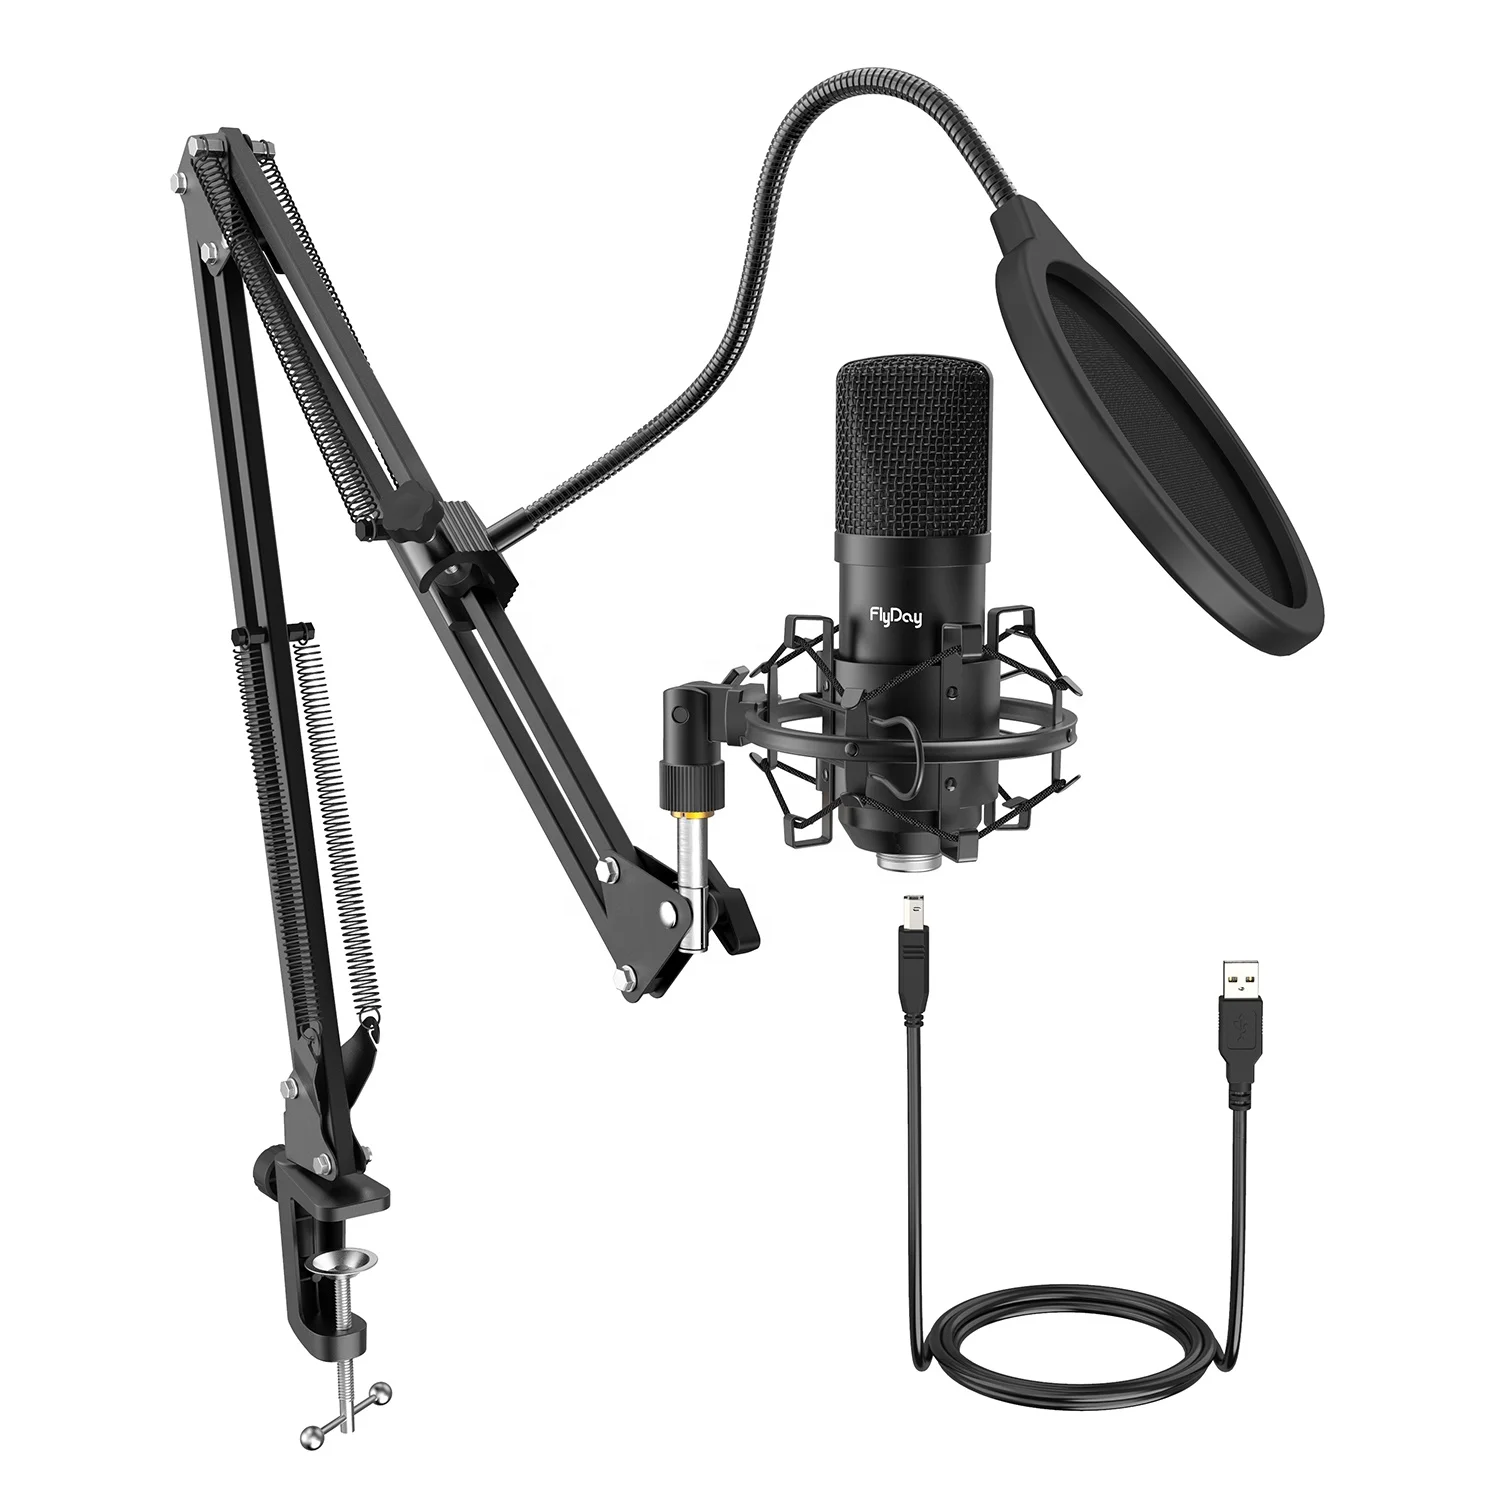 

OEM Factory mic Professional Recording Microfono Streaming USB Condenser Microphone Kit With Arm Stand T730